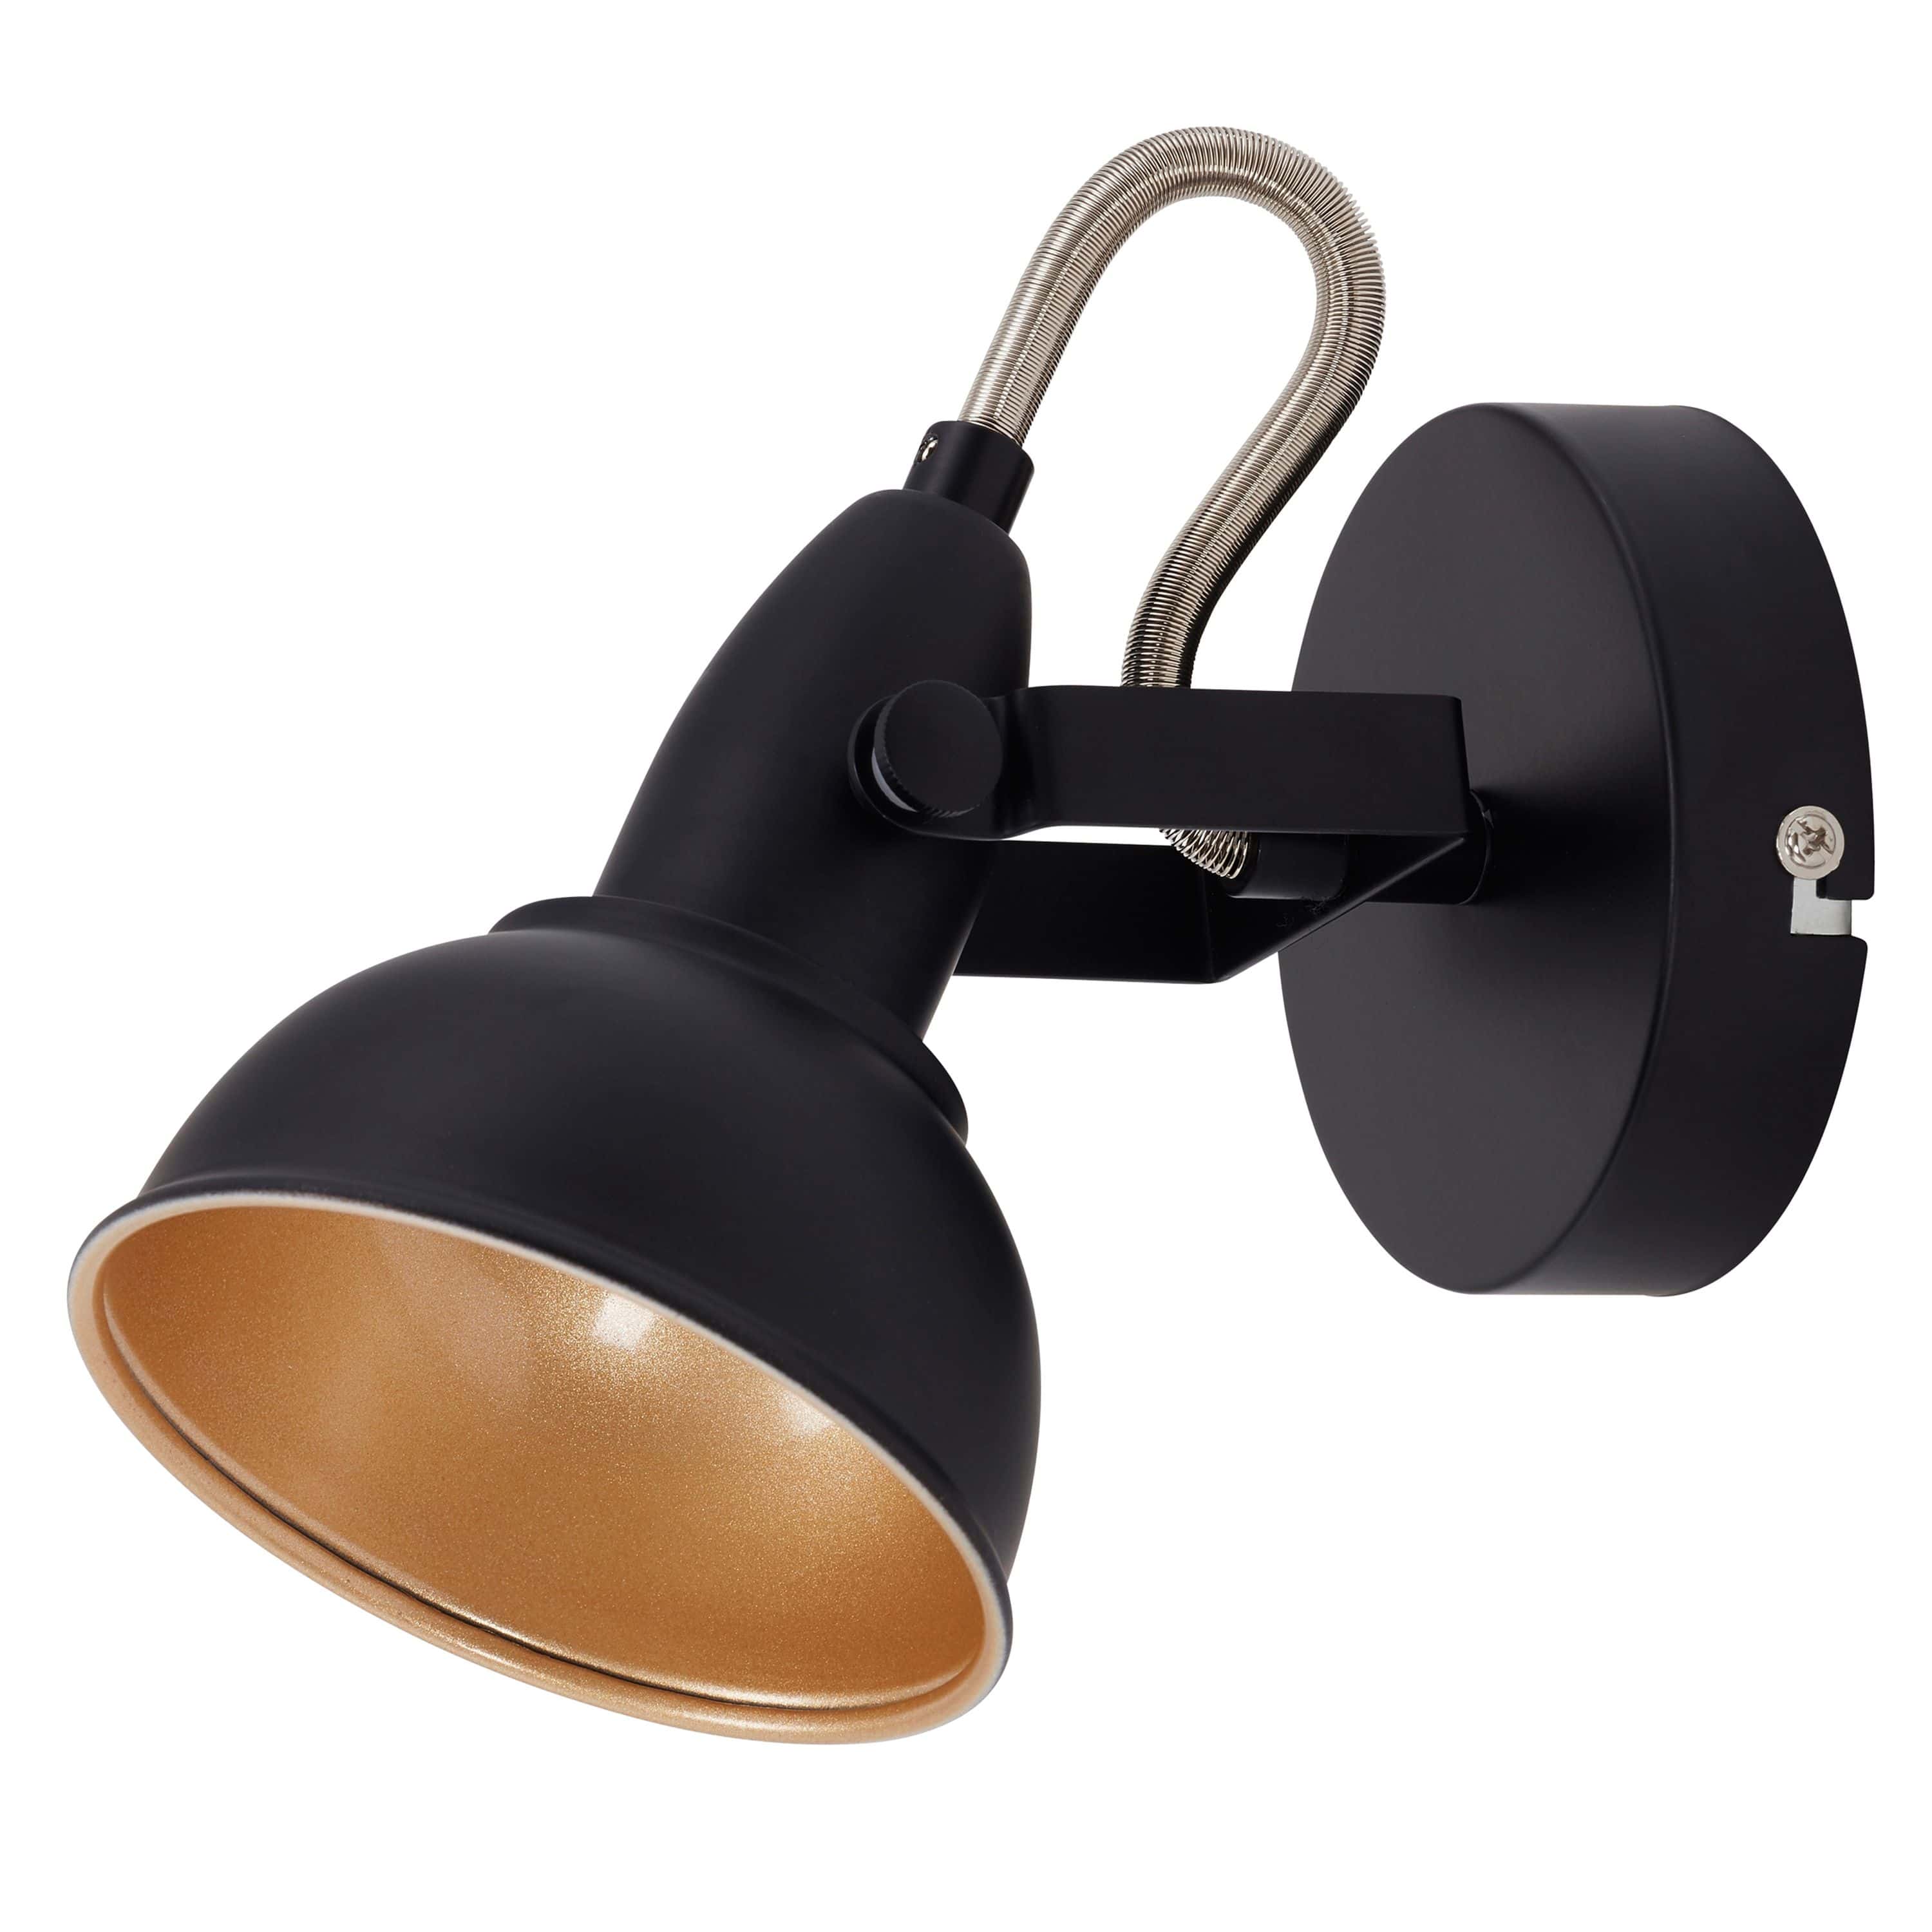 Spot and ceiling lamp, Ø 10 max. 40 black and